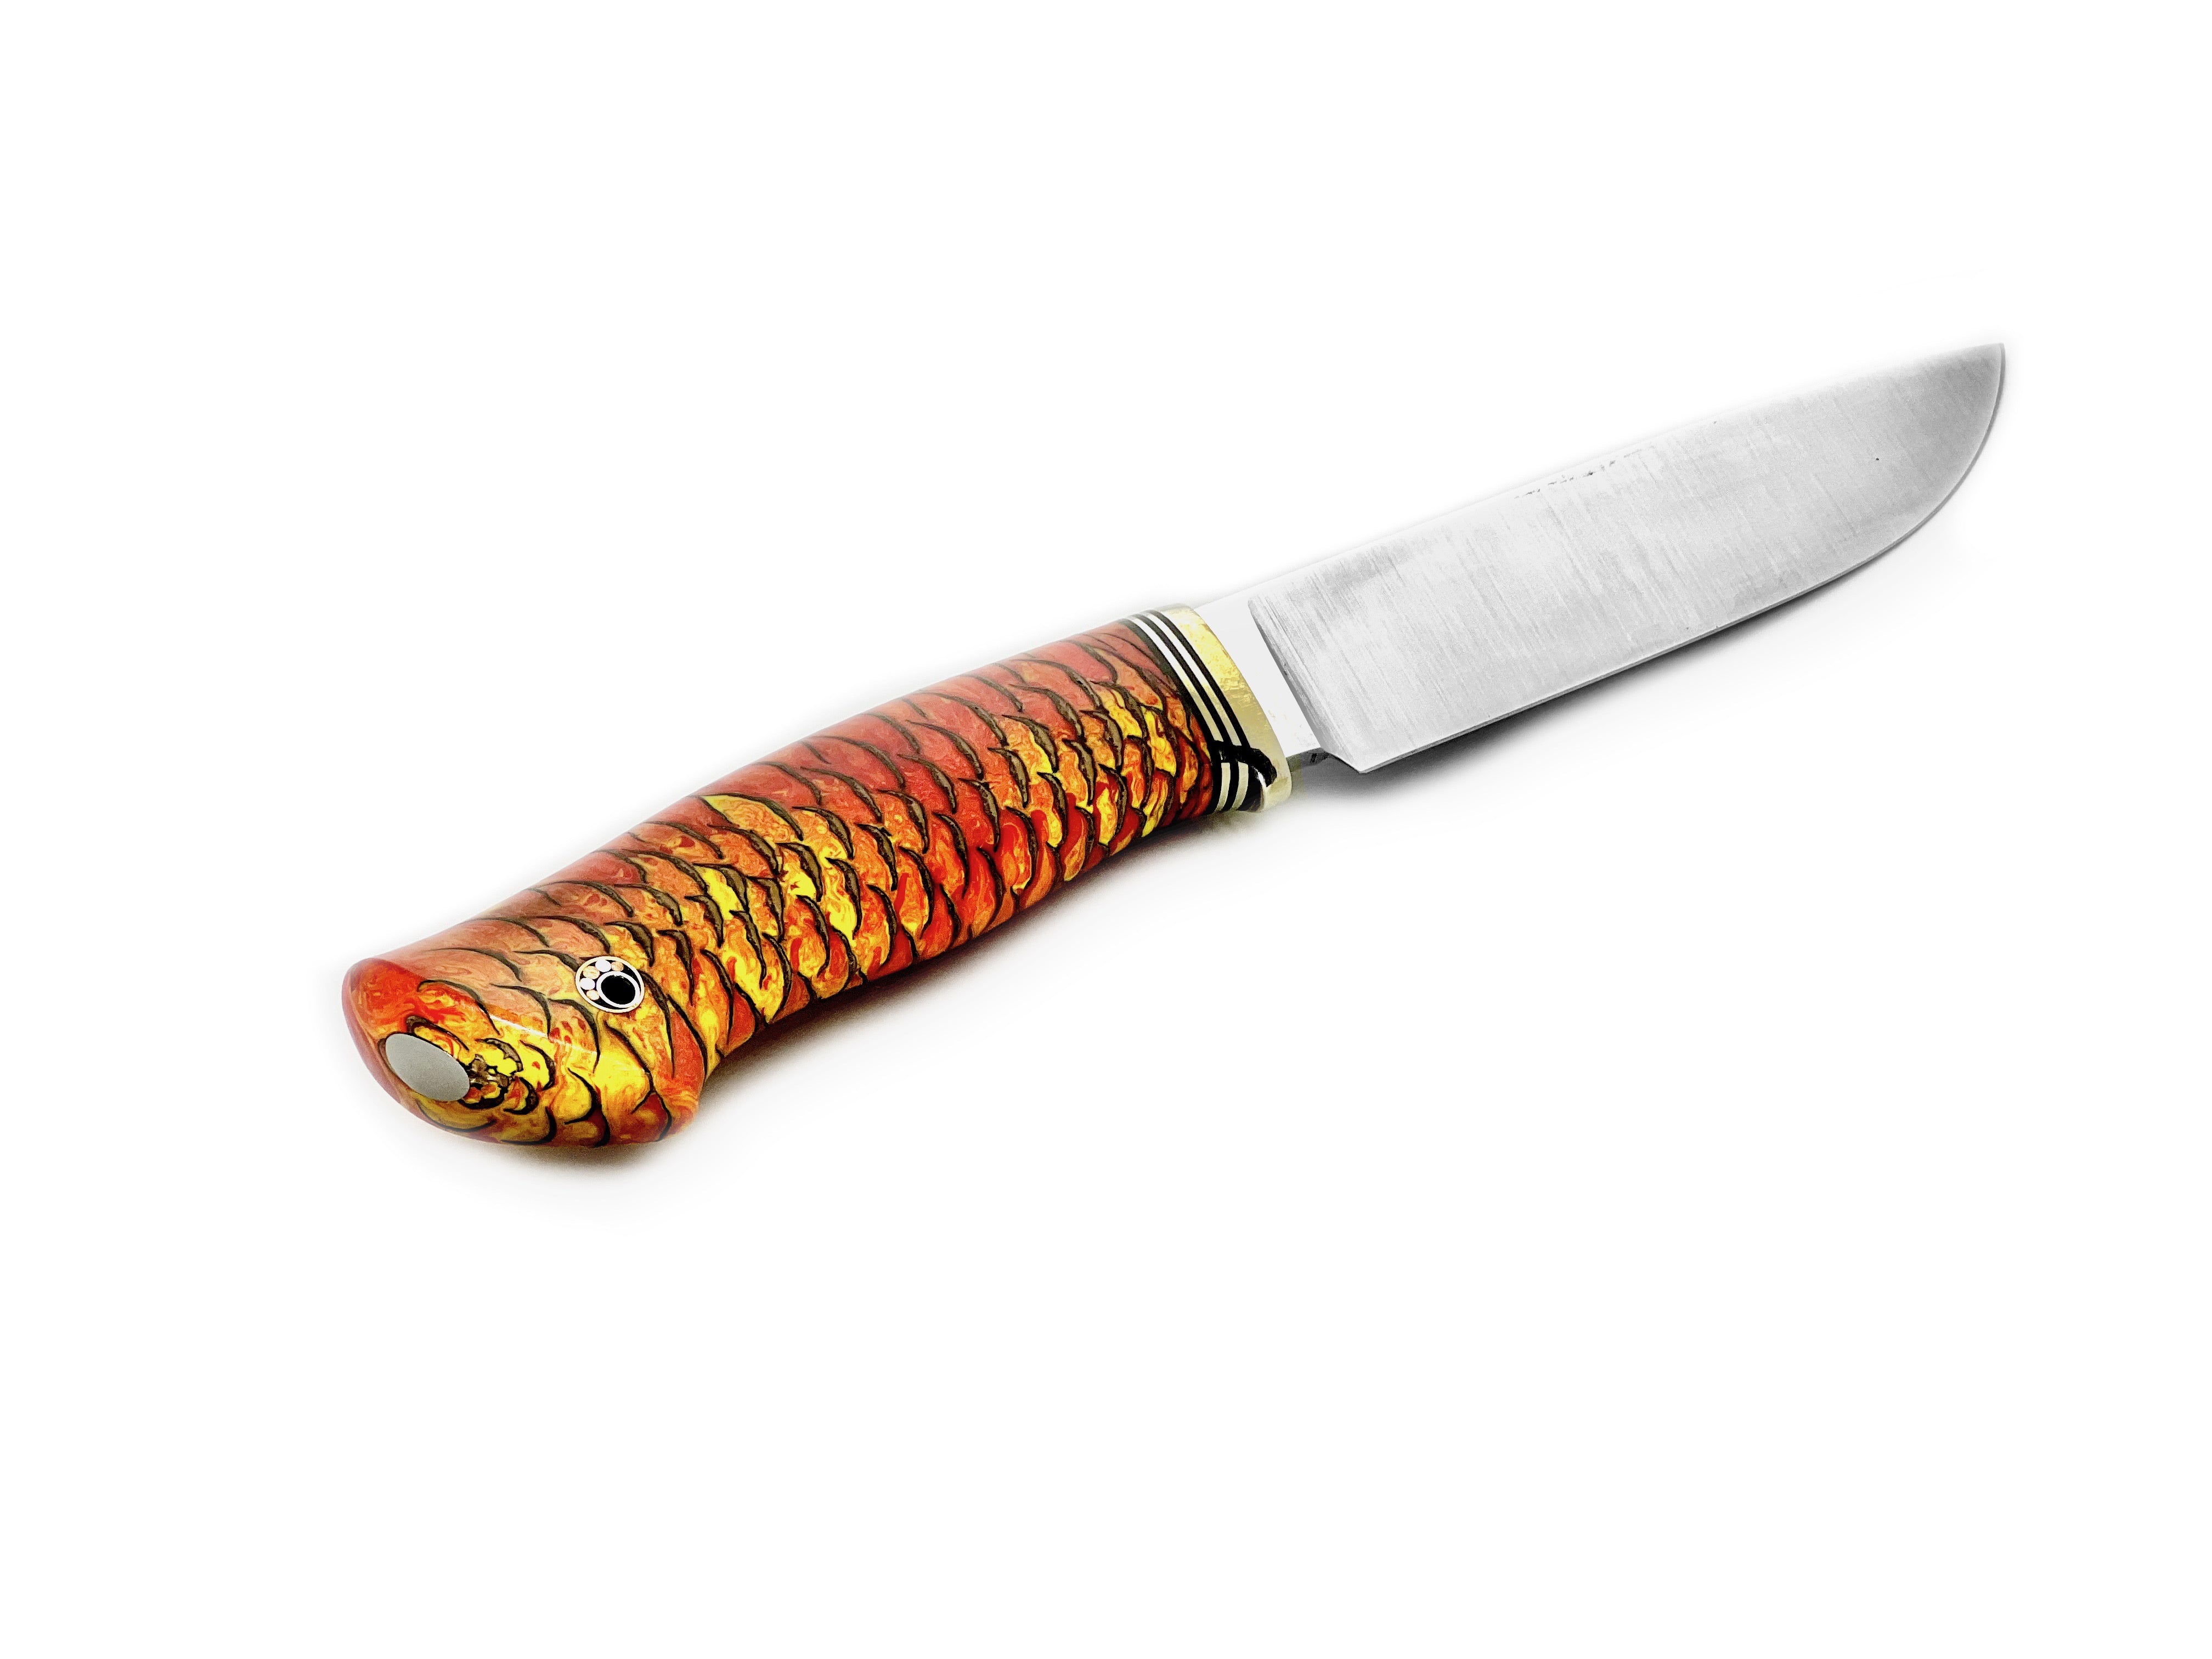 M390 Steel Hunting Knife with Acrylic Pineapple